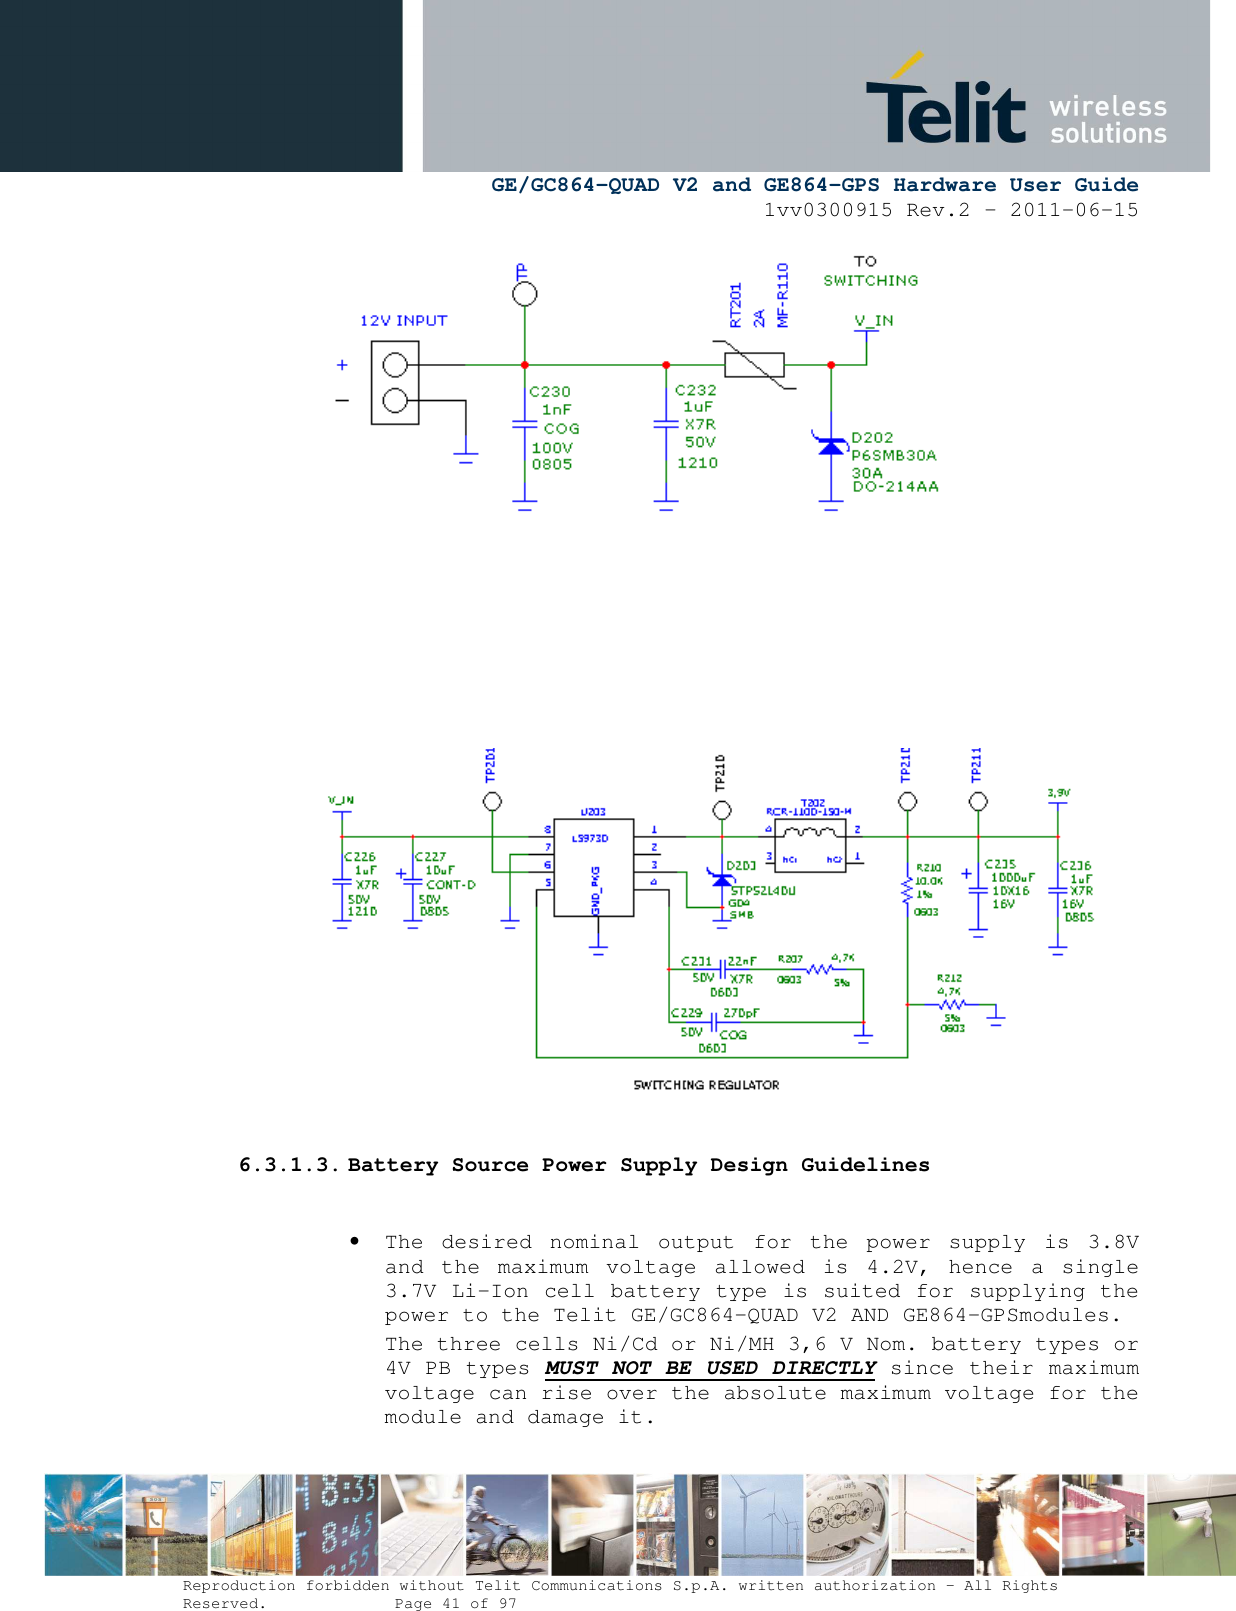      GE/GC864-QUAD V2 and GE864-GPS Hardware User Guide 1vv0300915 Rev.2 – 2011-06-15  Reproduction forbidden without Telit Communications S.p.A. written authorization - All Rights Reserved.    Page 41 of 97           6.3.1.3. Battery Source Power Supply Design Guidelines  • The  desired  nominal  output  for  the  power  supply  is  3.8V and  the  maximum  voltage  allowed  is  4.2V,  hence  a  single 3.7V Li-Ion cell battery type is suited for supplying the power to the Telit GE/GC864-QUAD V2 AND GE864-GPSmodules. The three cells Ni/Cd or Ni/MH 3,6 V Nom. battery types or 4V PB types MUST NOT BE USED DIRECTLY since their maximum voltage can rise over the absolute maximum voltage for the module and damage it. 